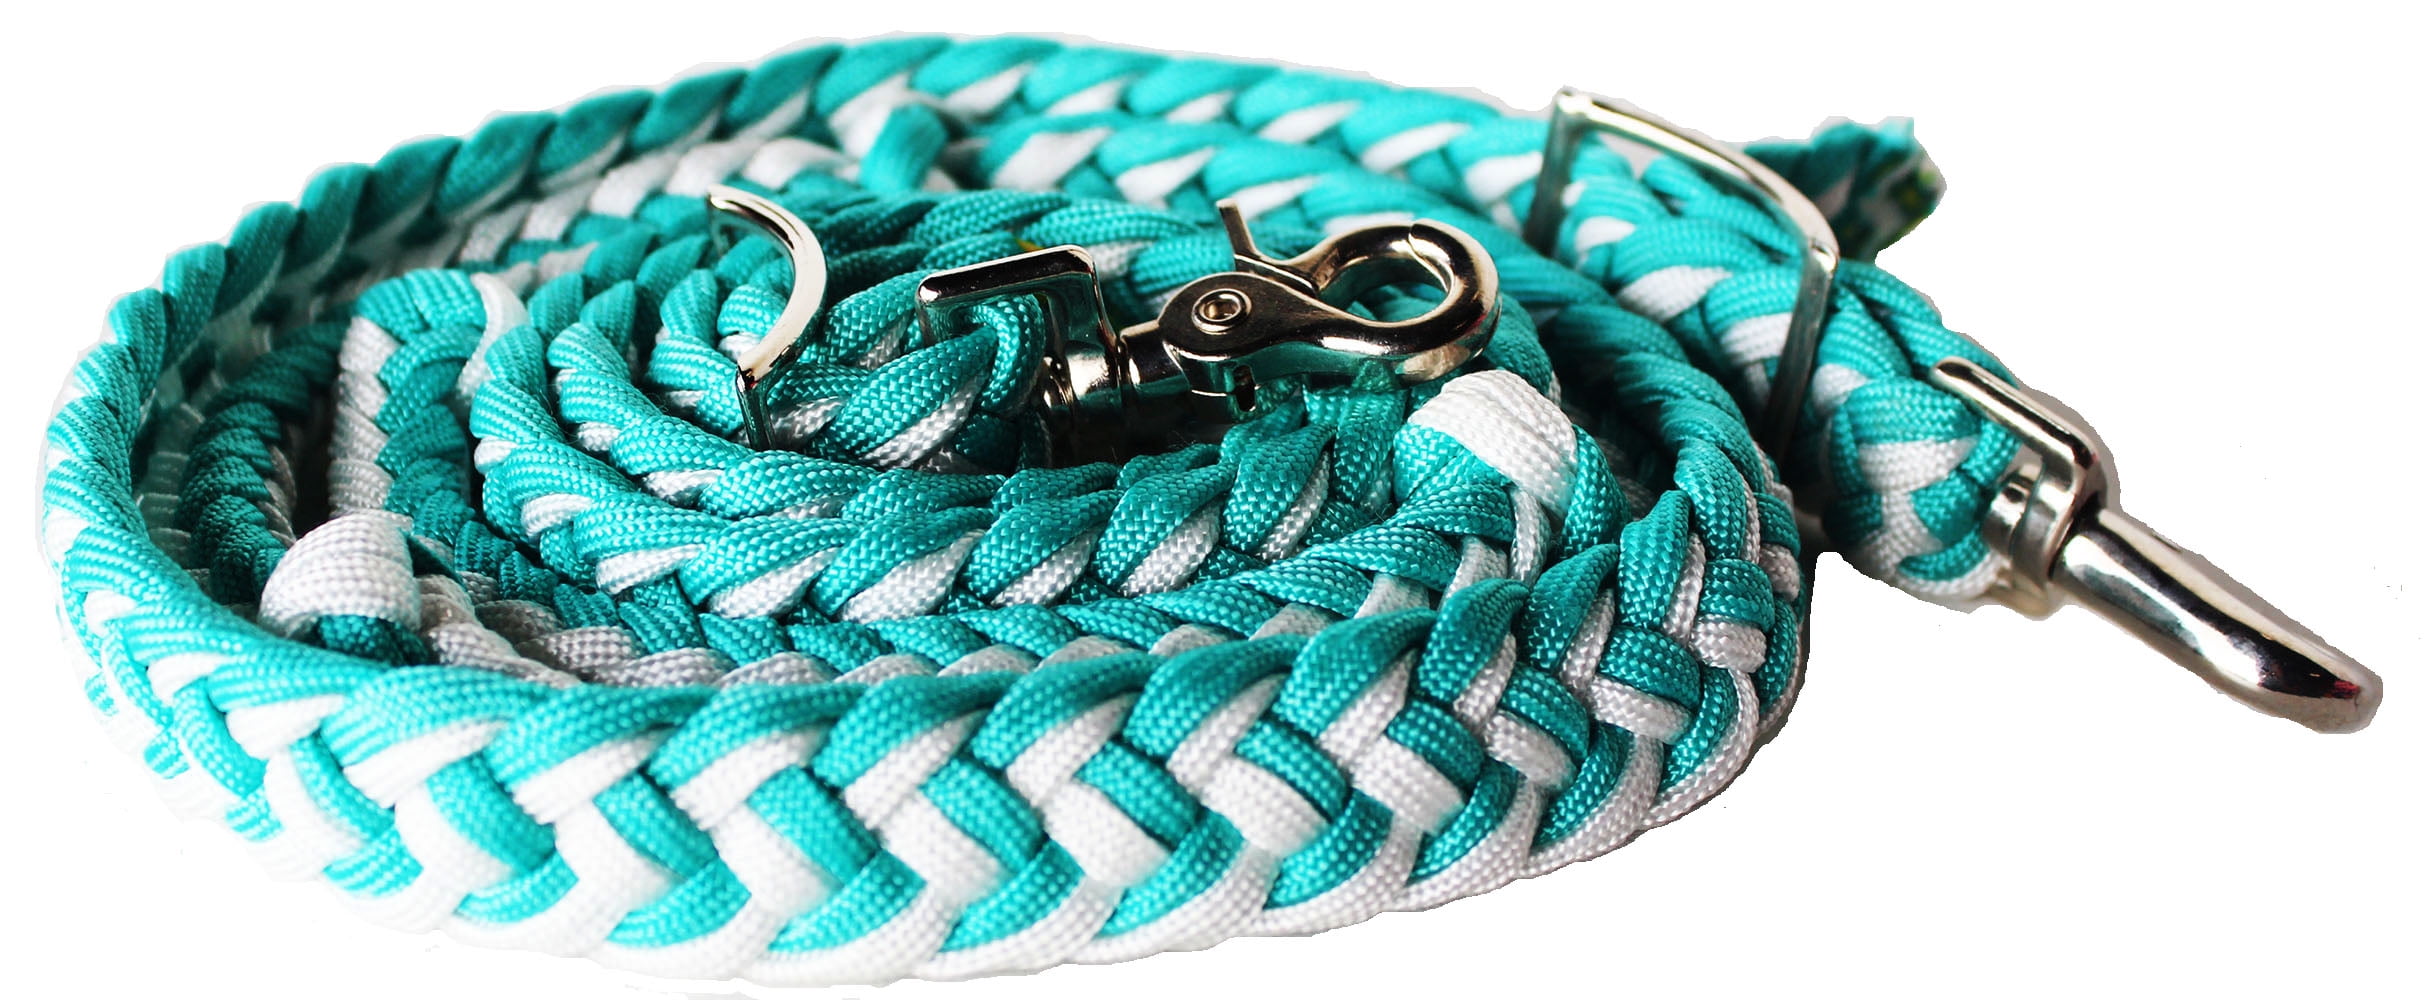 Teal & White Braided Knotted Barrel Racing Reins Roping Contest Trigger Snap 92" 